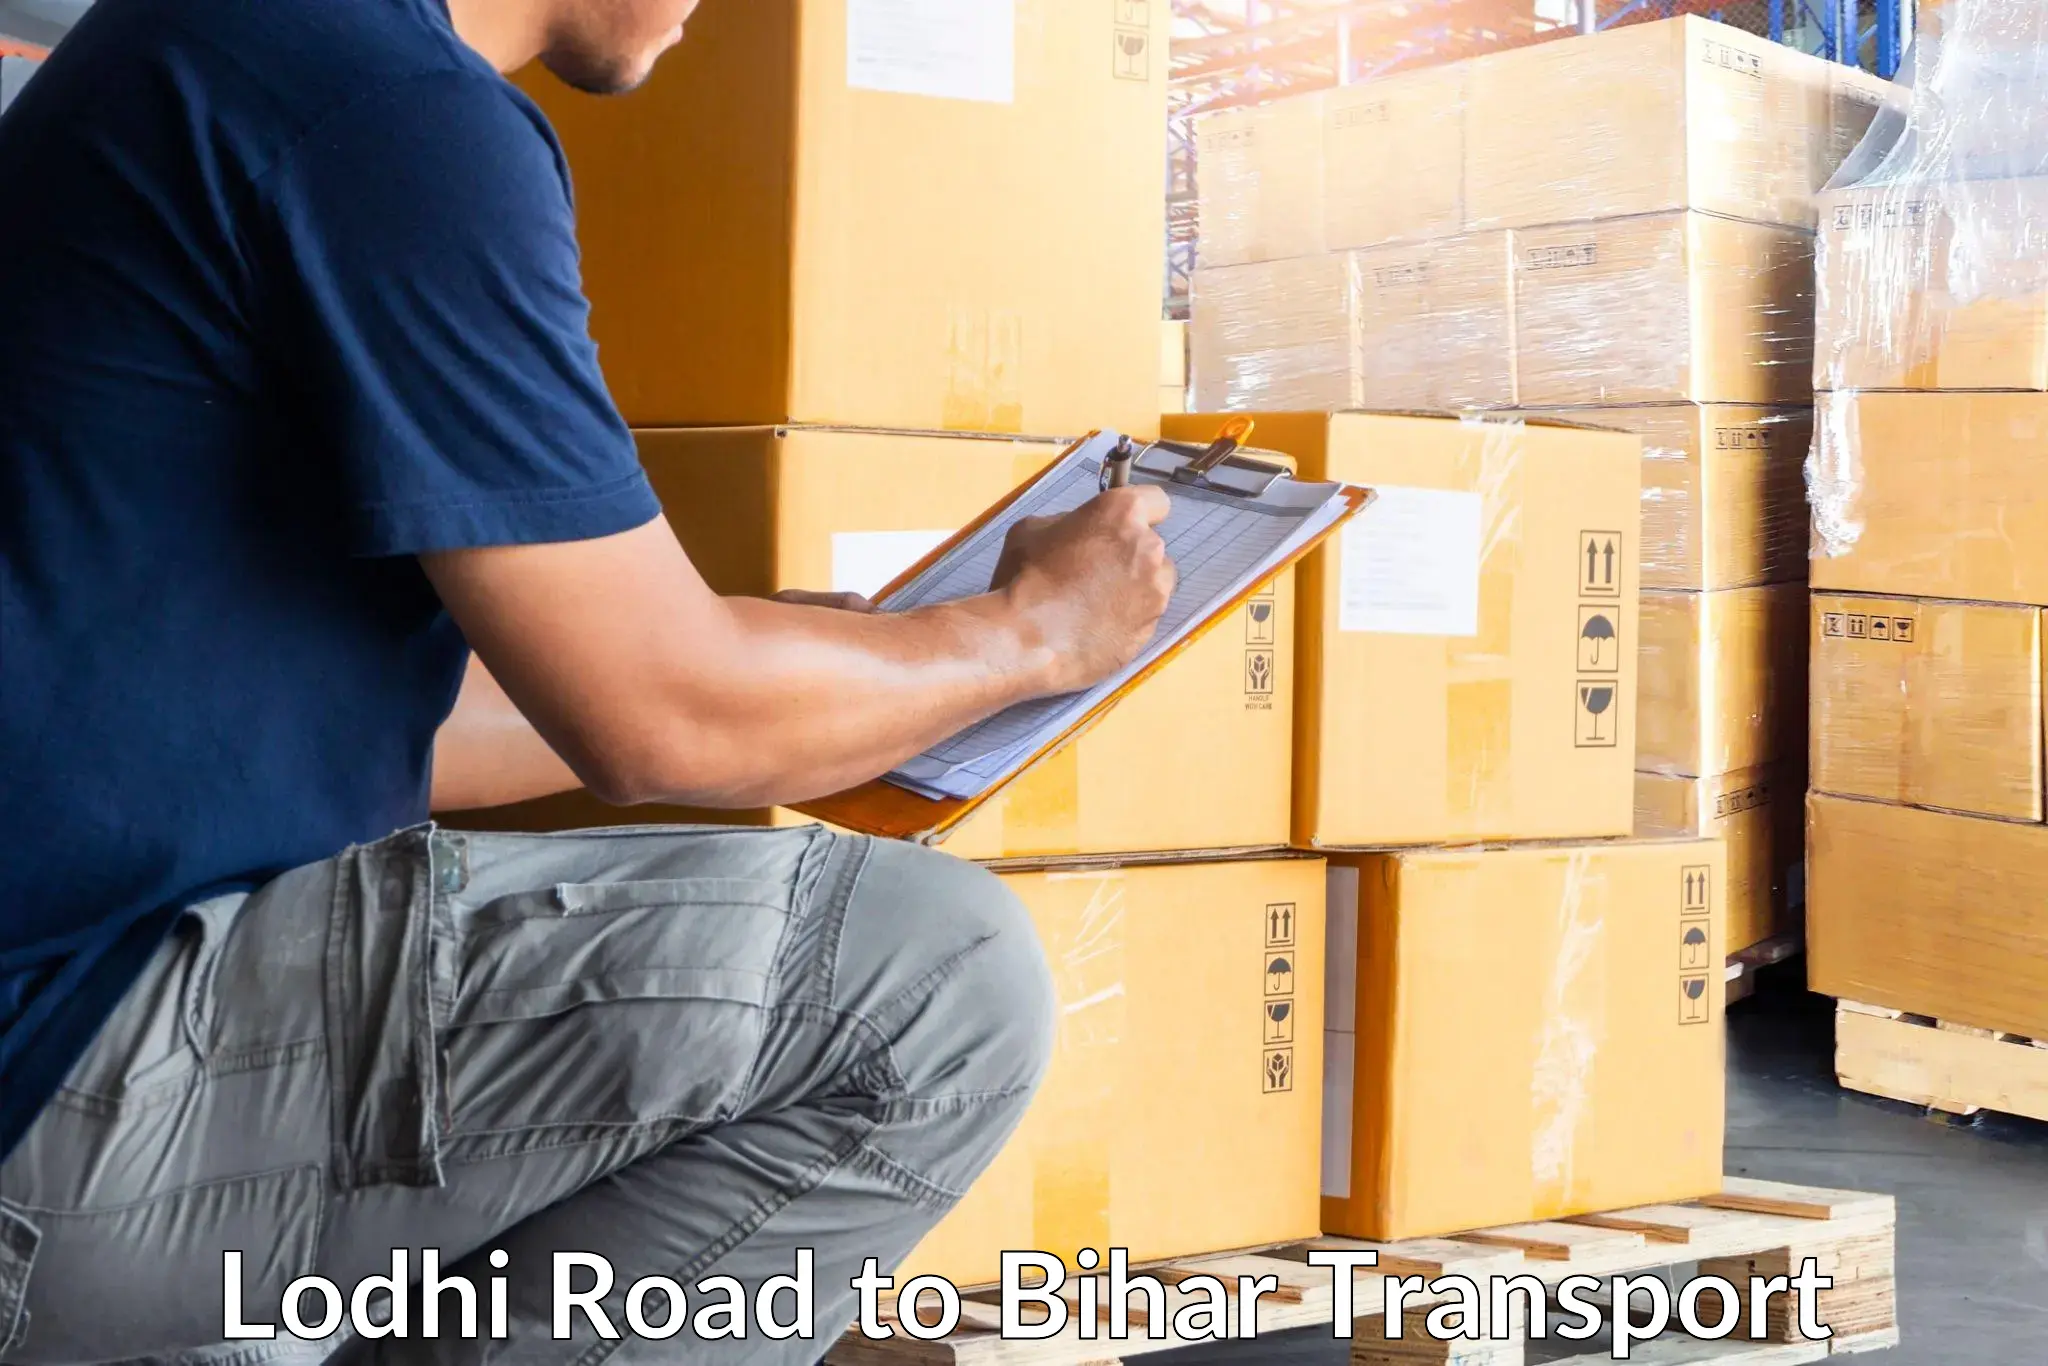 Cargo transport services Lodhi Road to Mairwa